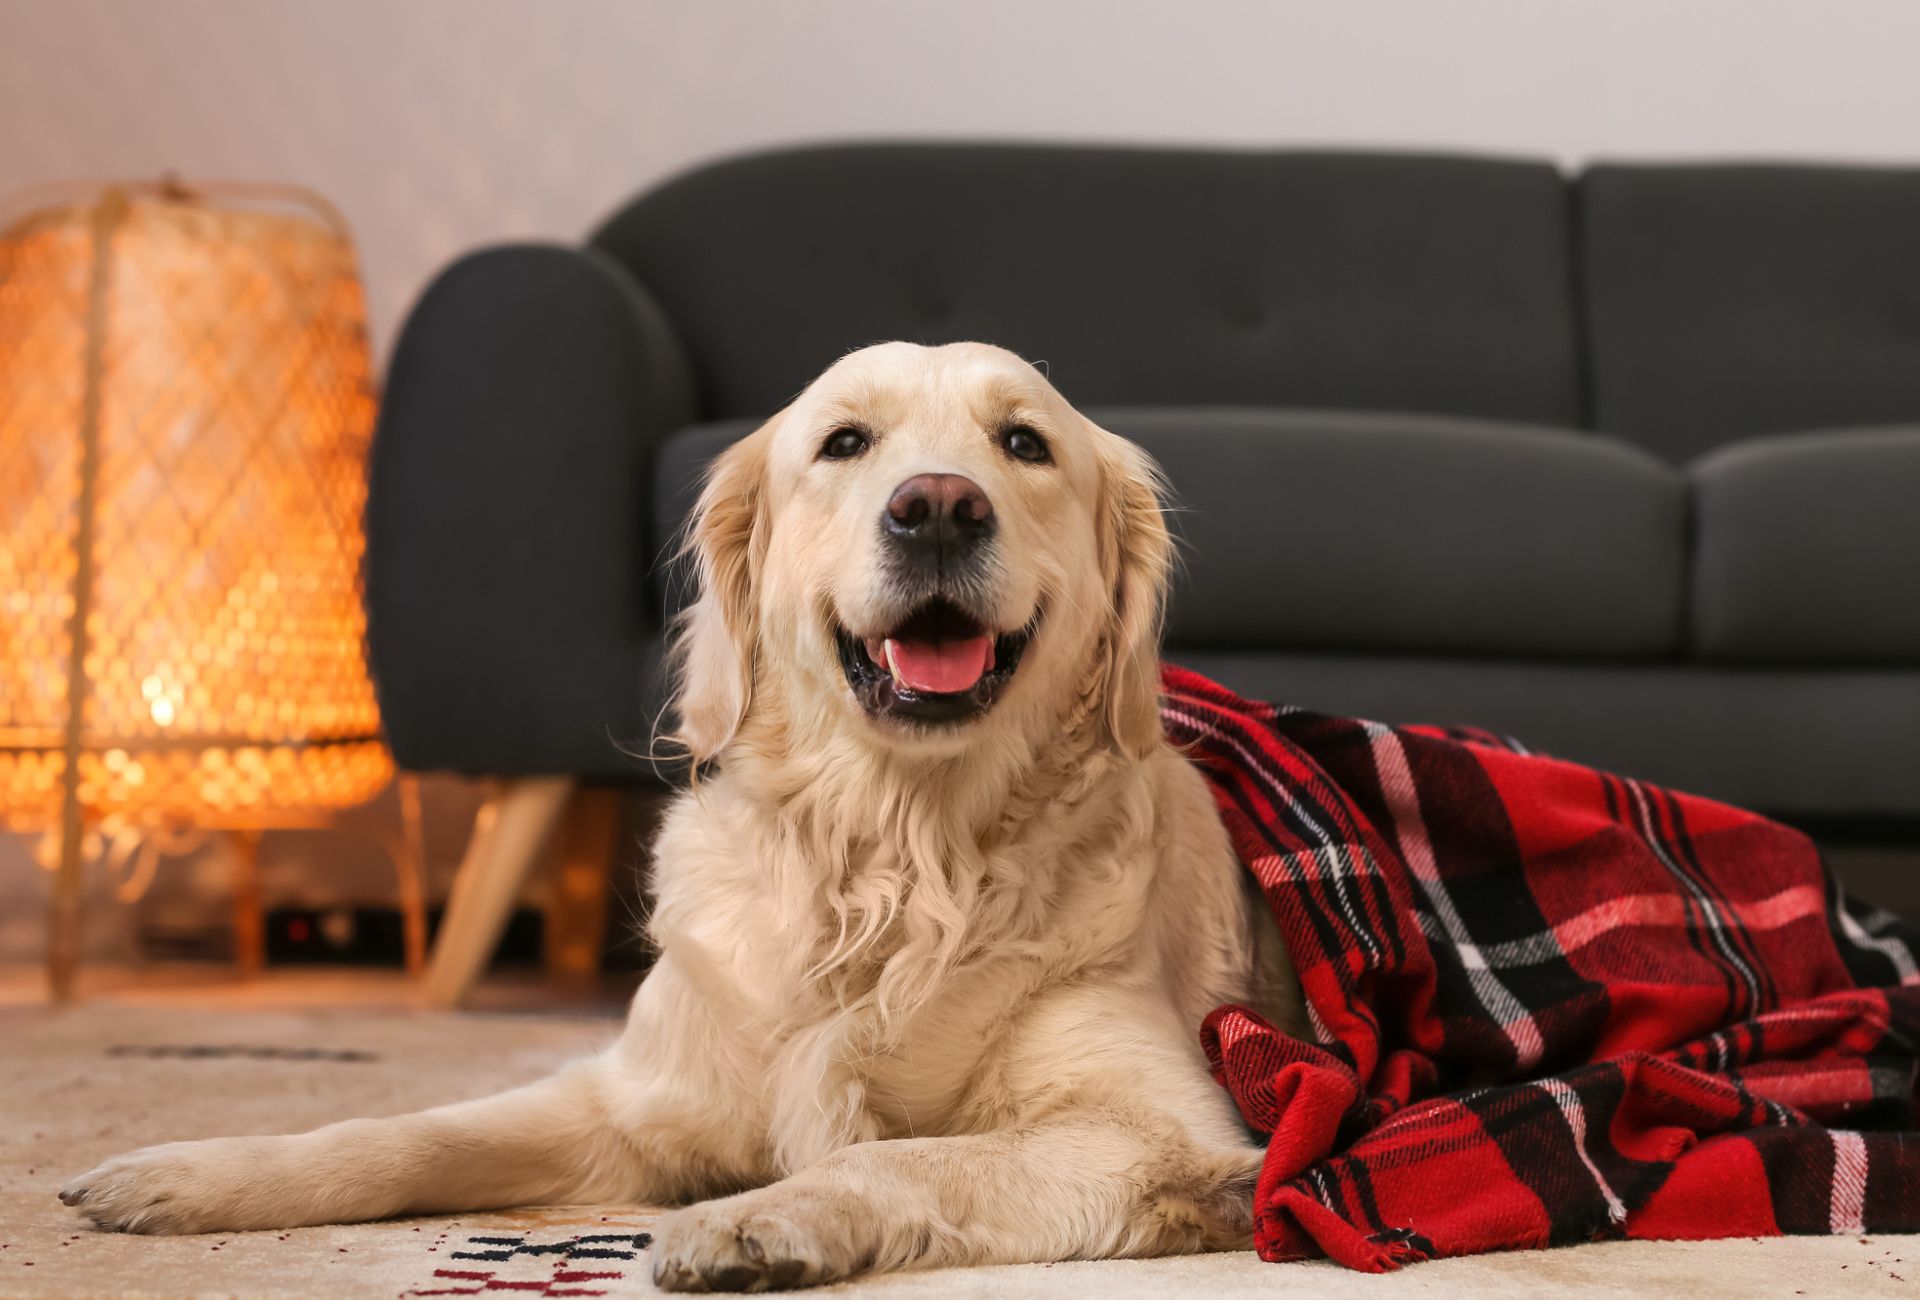 Golden Retriever wrapped in a red and black checkered blanket.